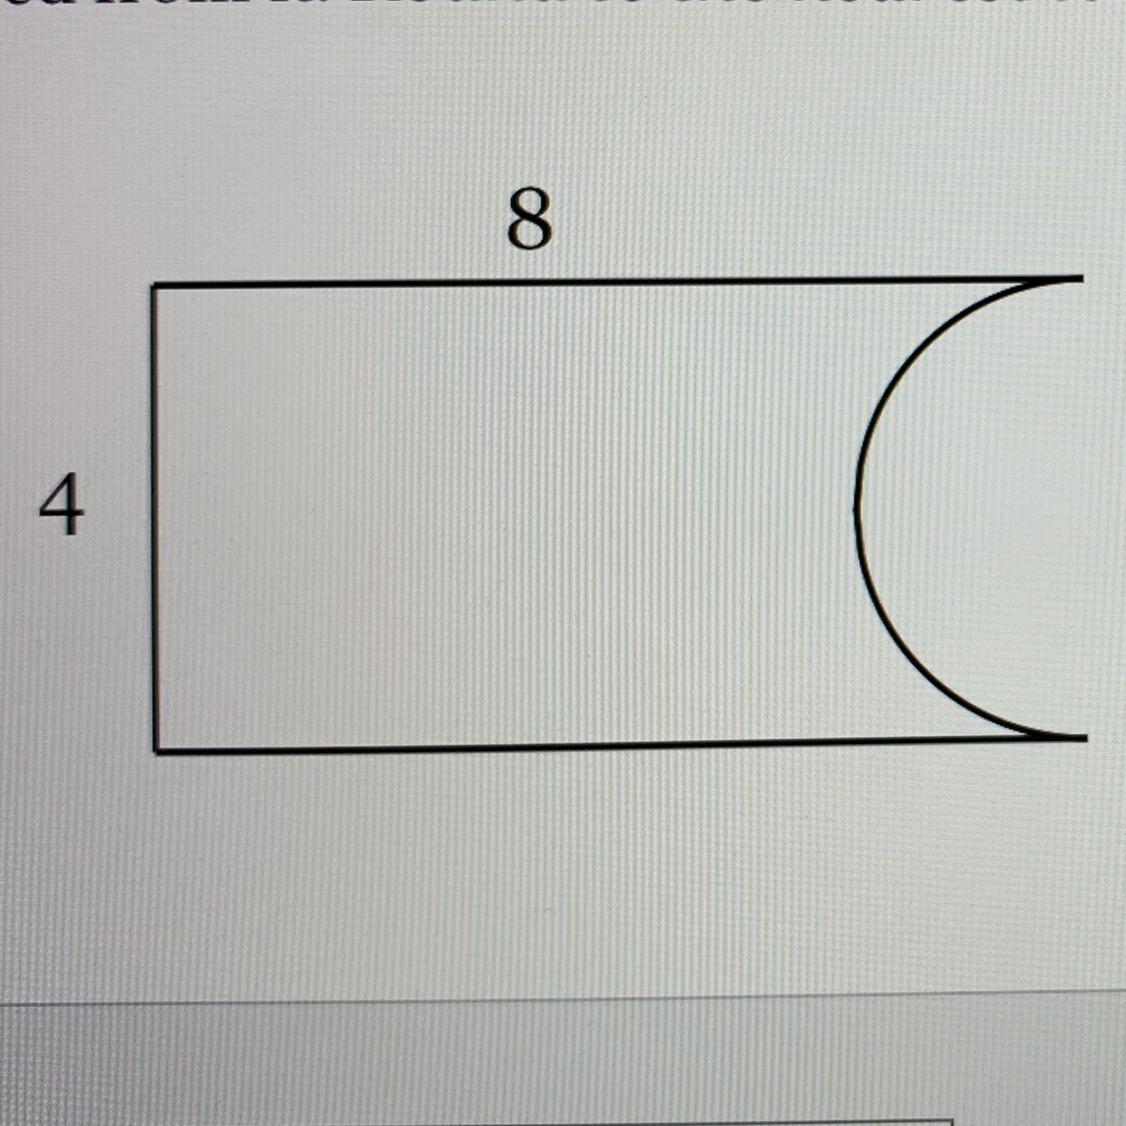 Find The Area Of The Figure Below, Composed Of A Rectangle With A Semicircleremoved From It. Round To